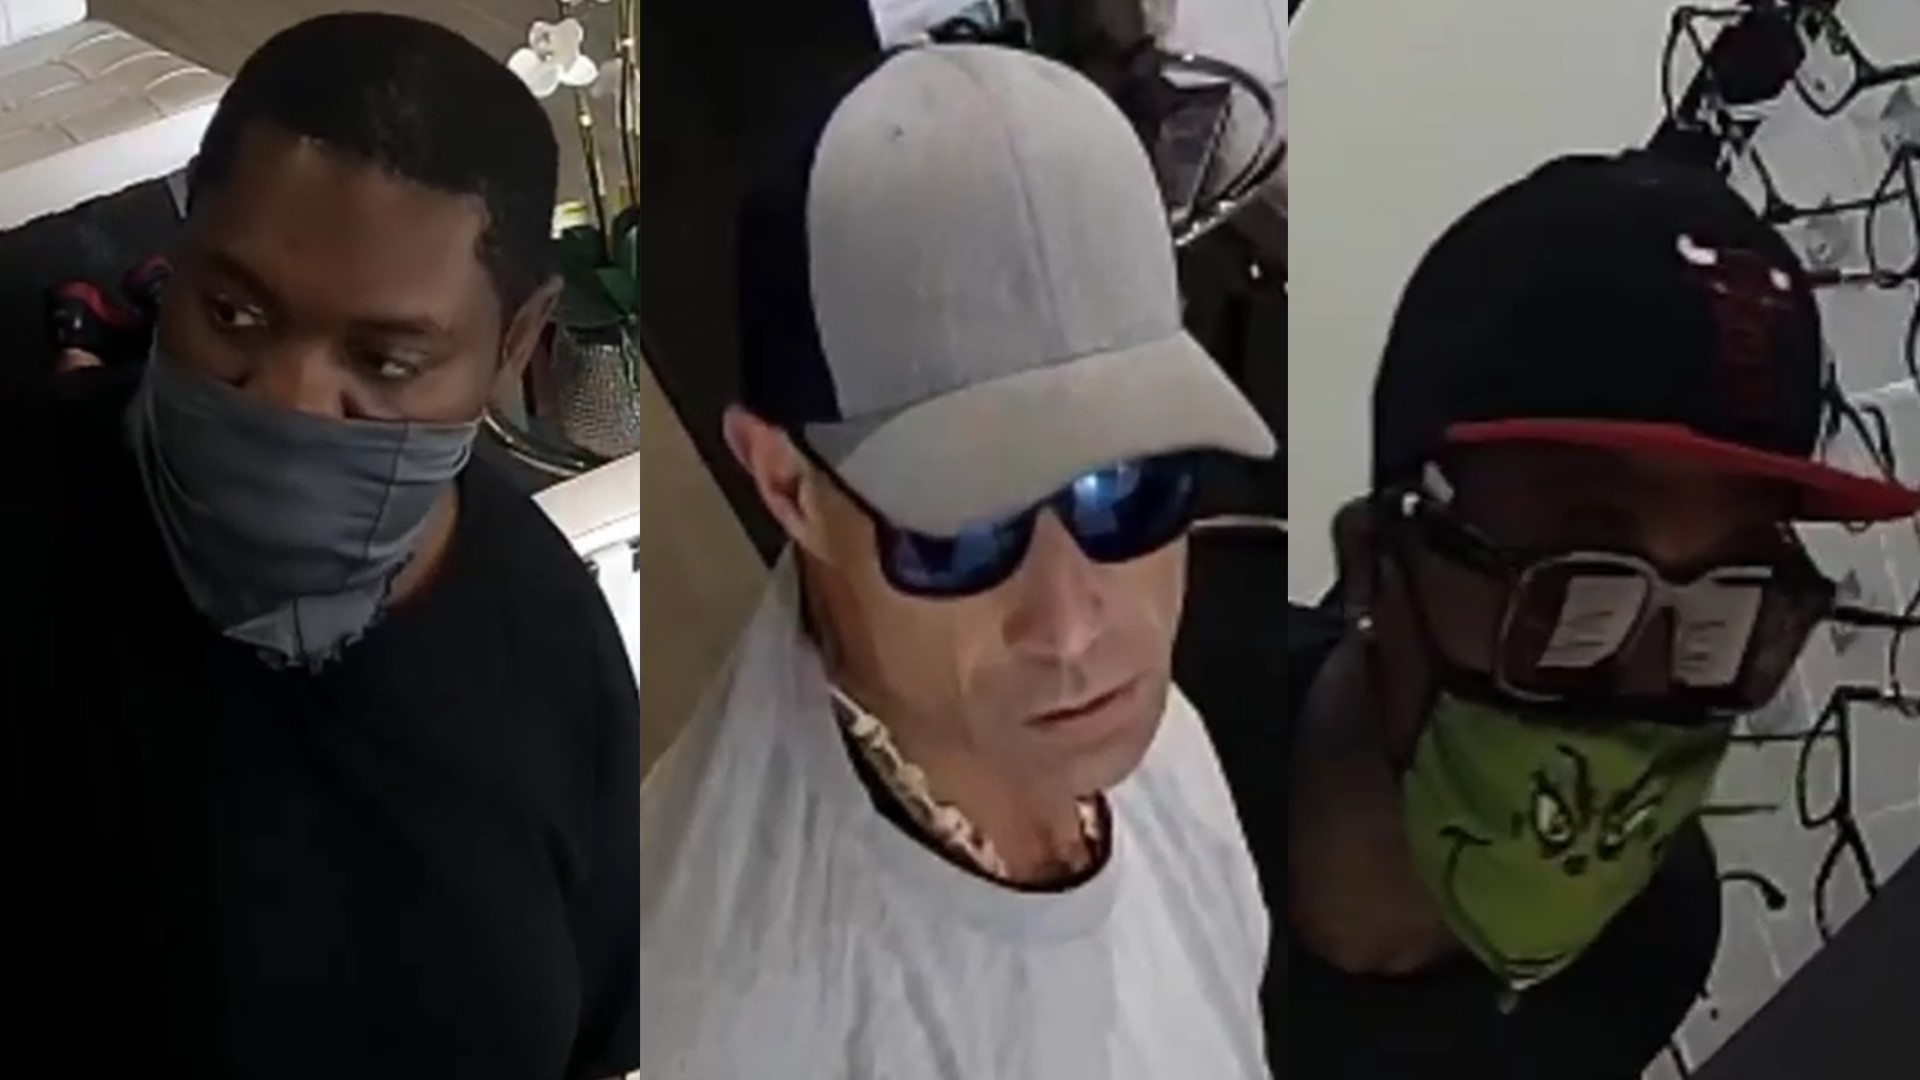 Houston Police released new details on the robbery after the three men stole about $50,000 worth of merchandise.